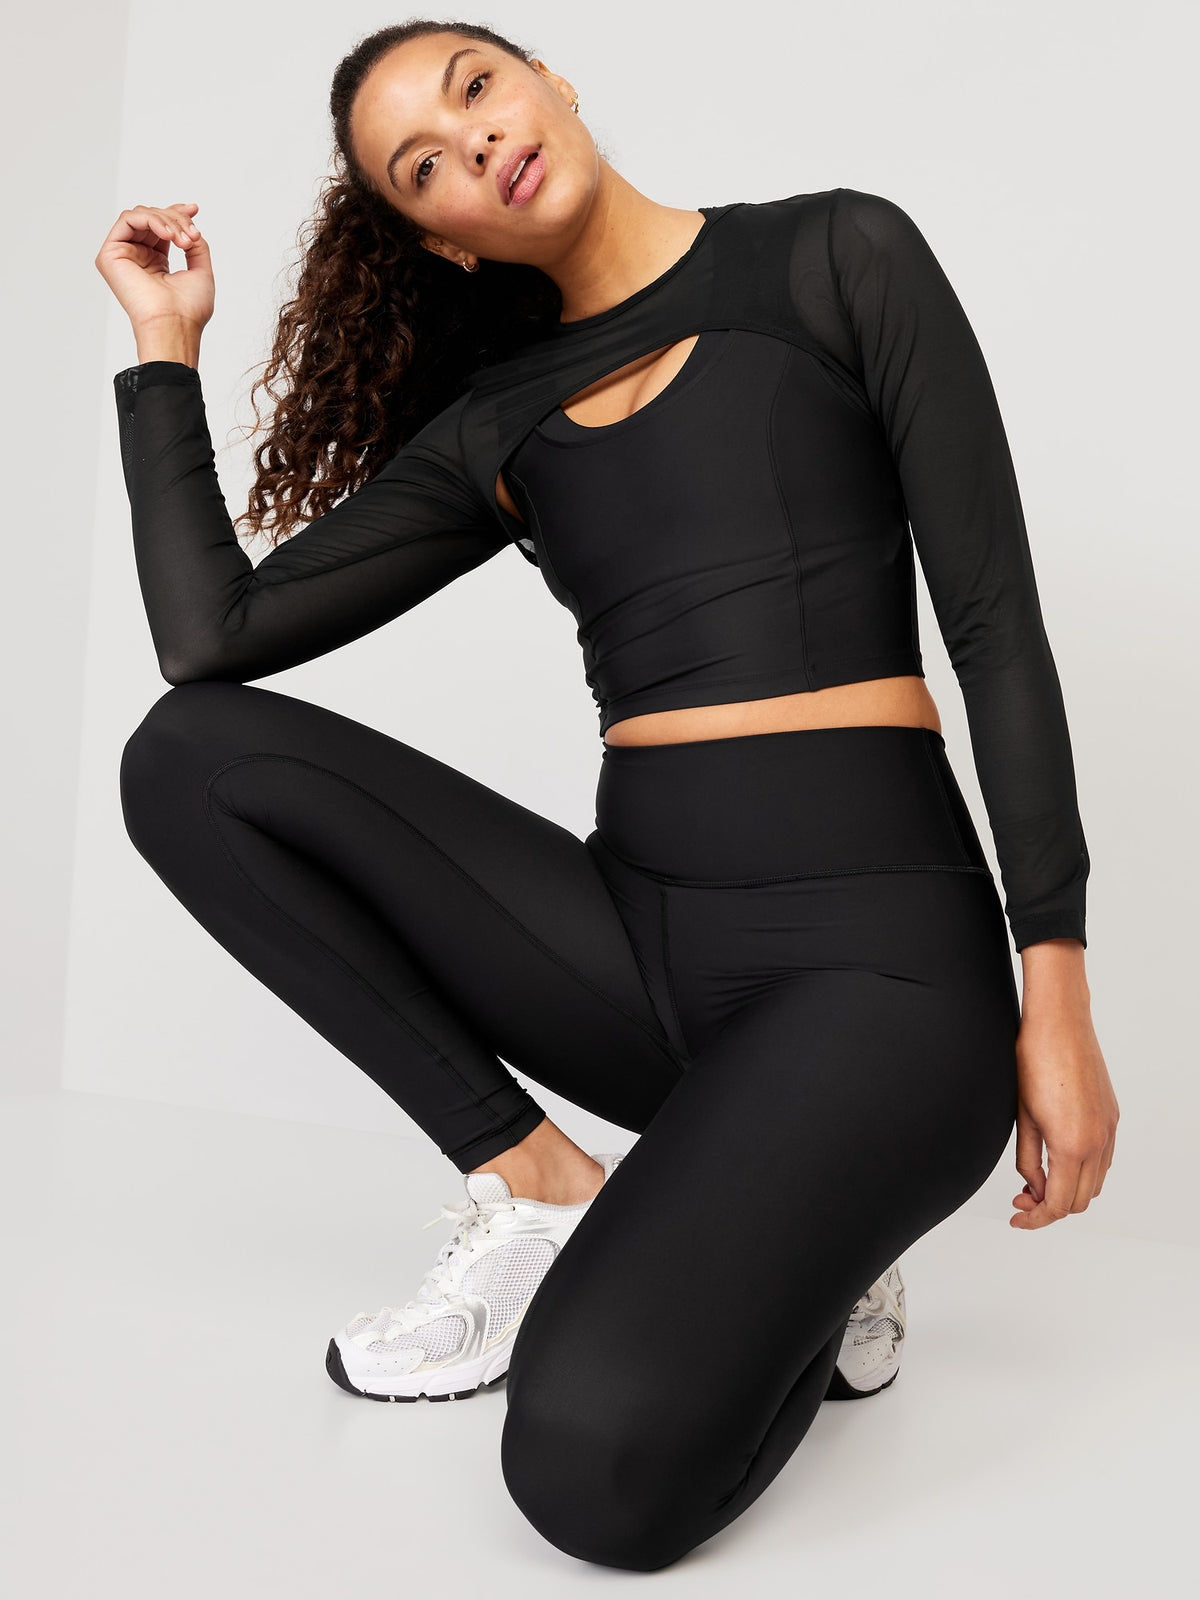 High-Waisted PowerSoft Leggings for Women - Old Navy Philippines